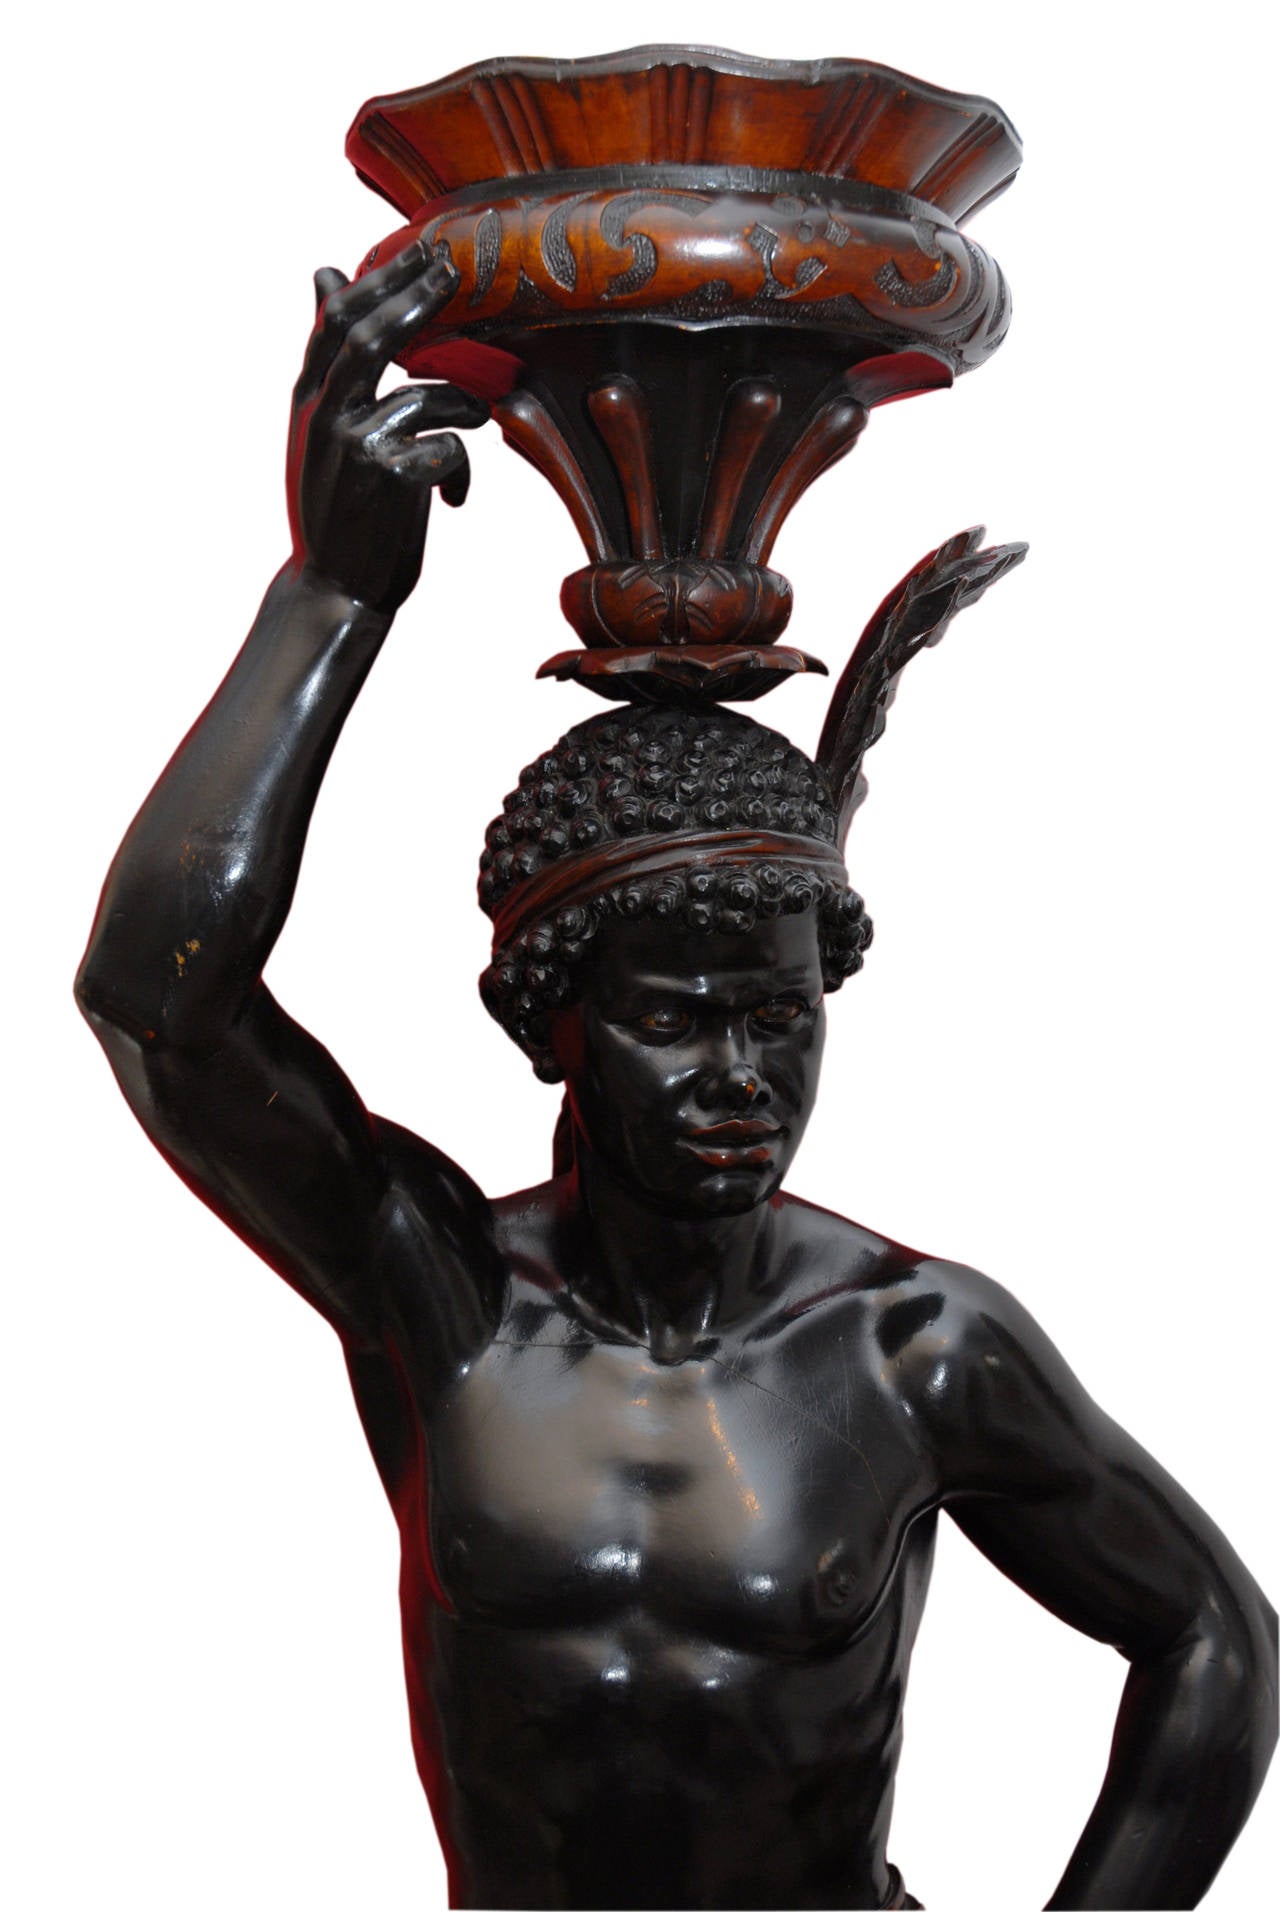 Work of Valentino Panciera Besarel, about 1880, really Fine carving, in male and female figures, over the head is a vase holder, standing on carved bases.

Valentino Pancera Besarel (Astragal, 29 July 1829- Venice, 11 December 1902) was an Italian